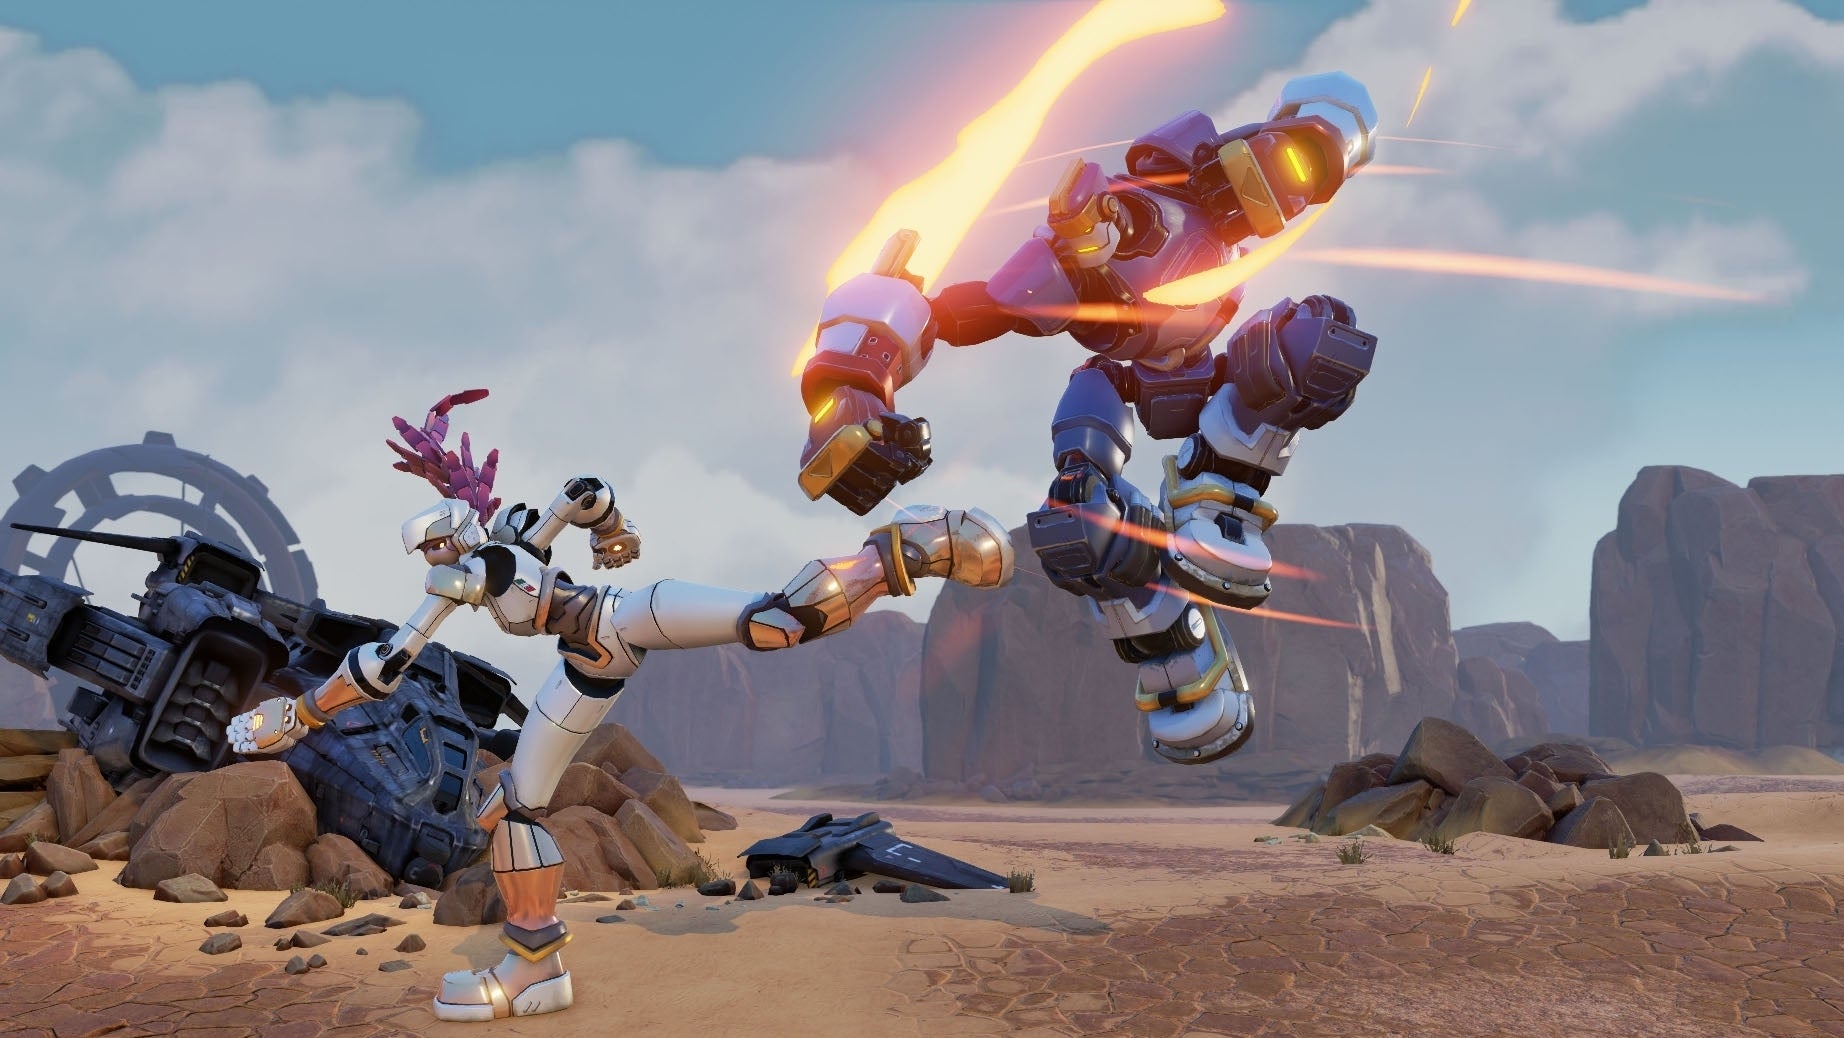 Image for Three years later, ex-Rising Thunder team confirms it's working on fighting game at Riot